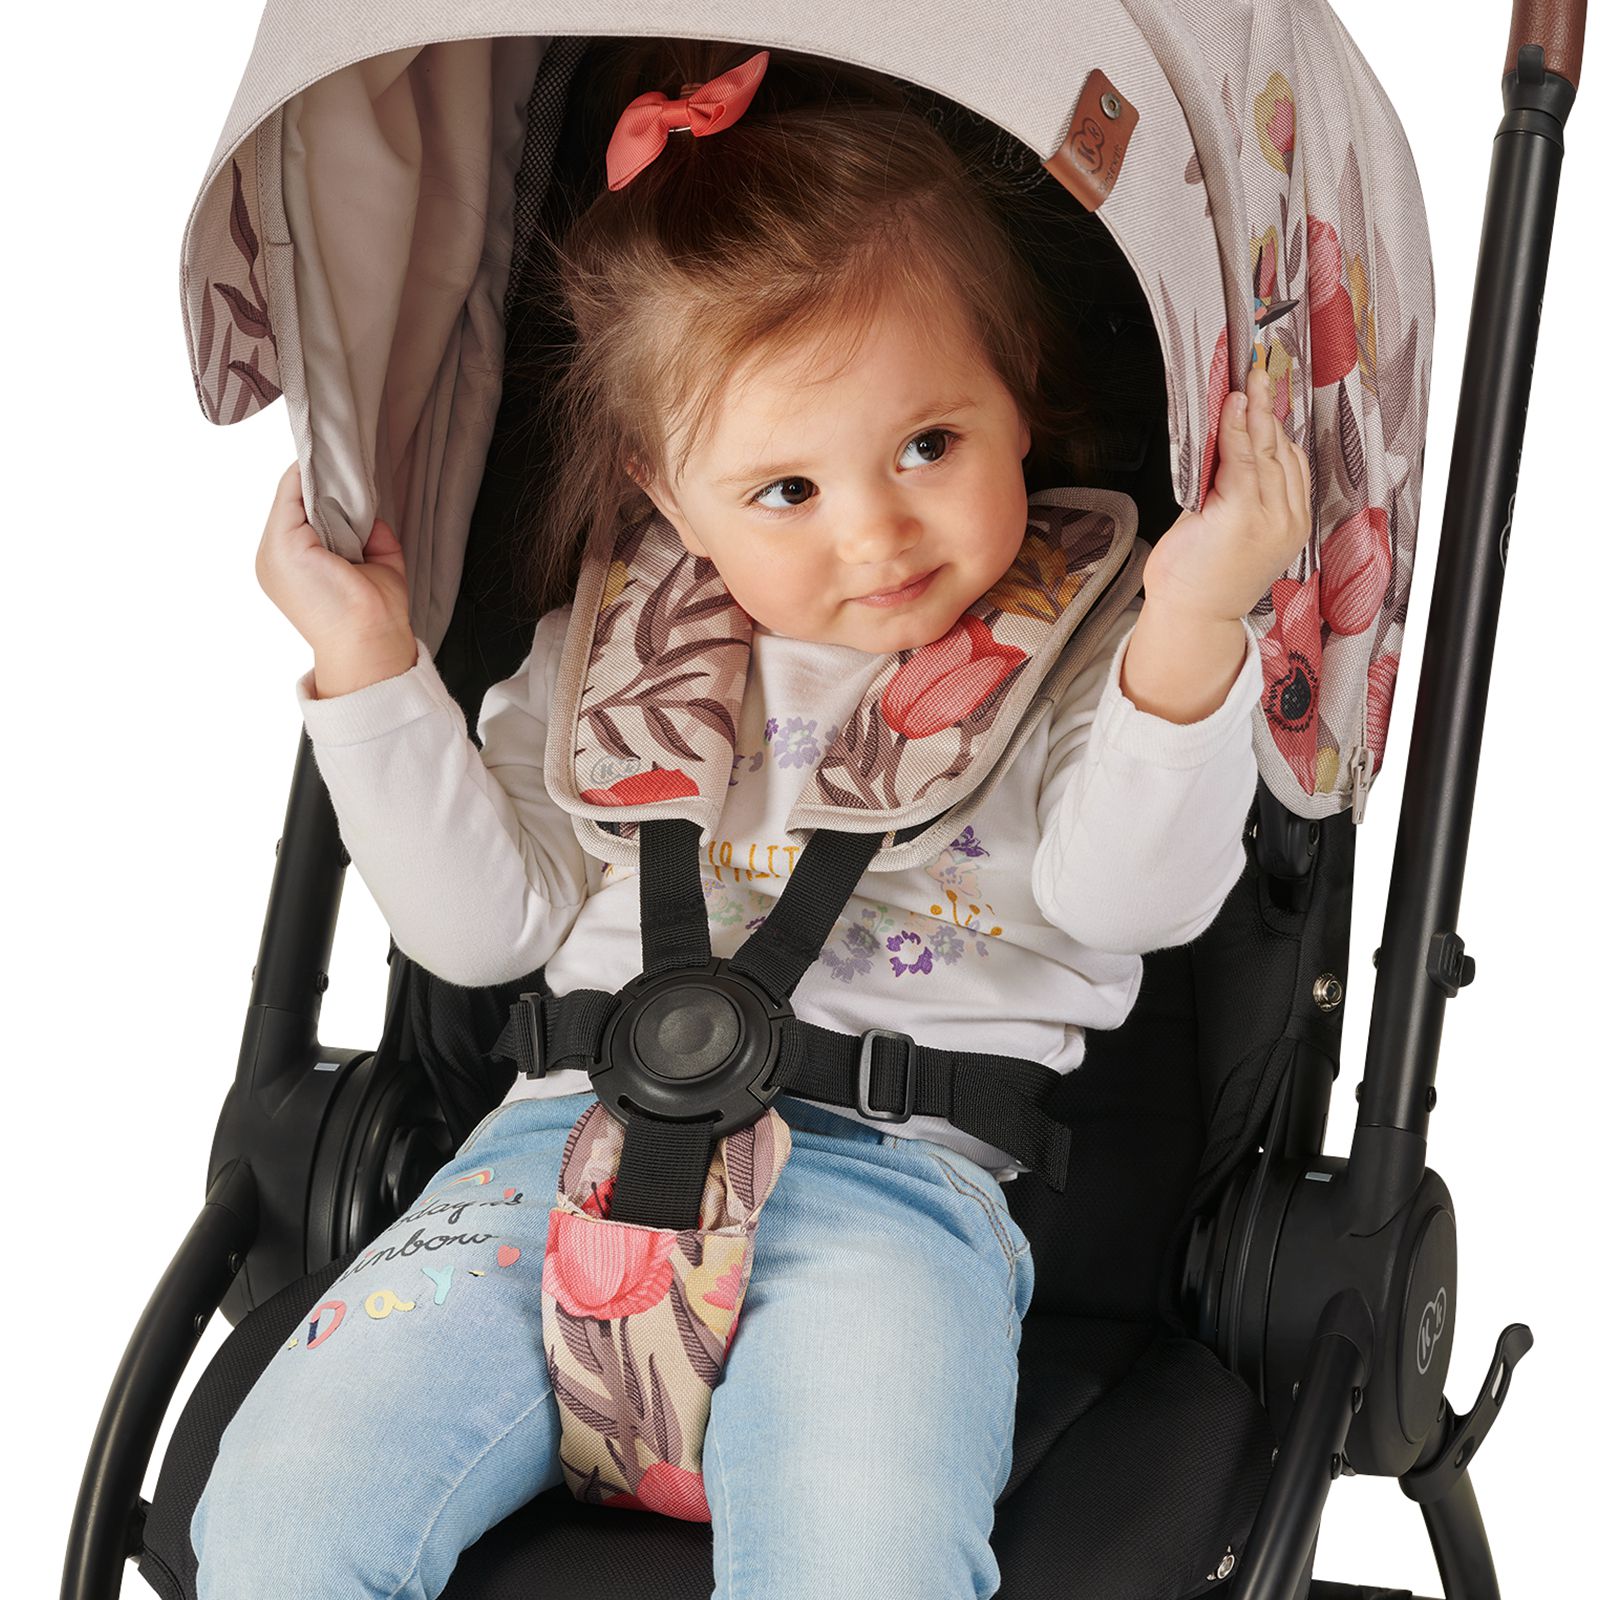 A little girl is sitting down in a stroller and is secured with a safety harness – she's grabbing the sun shade and smiling